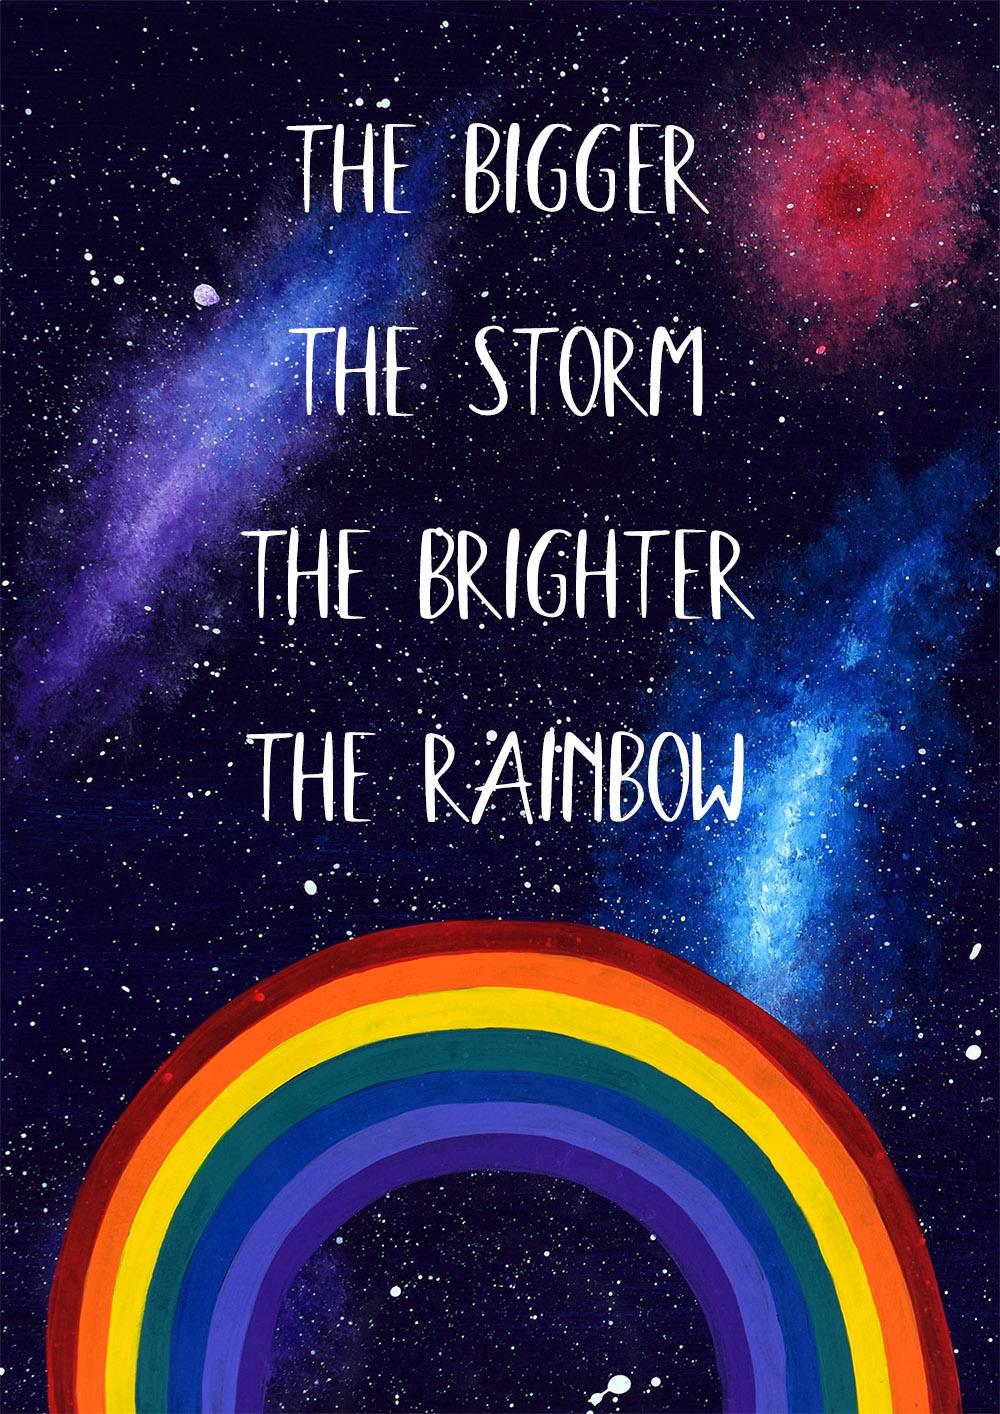 Rainbow art print with inspirational quote